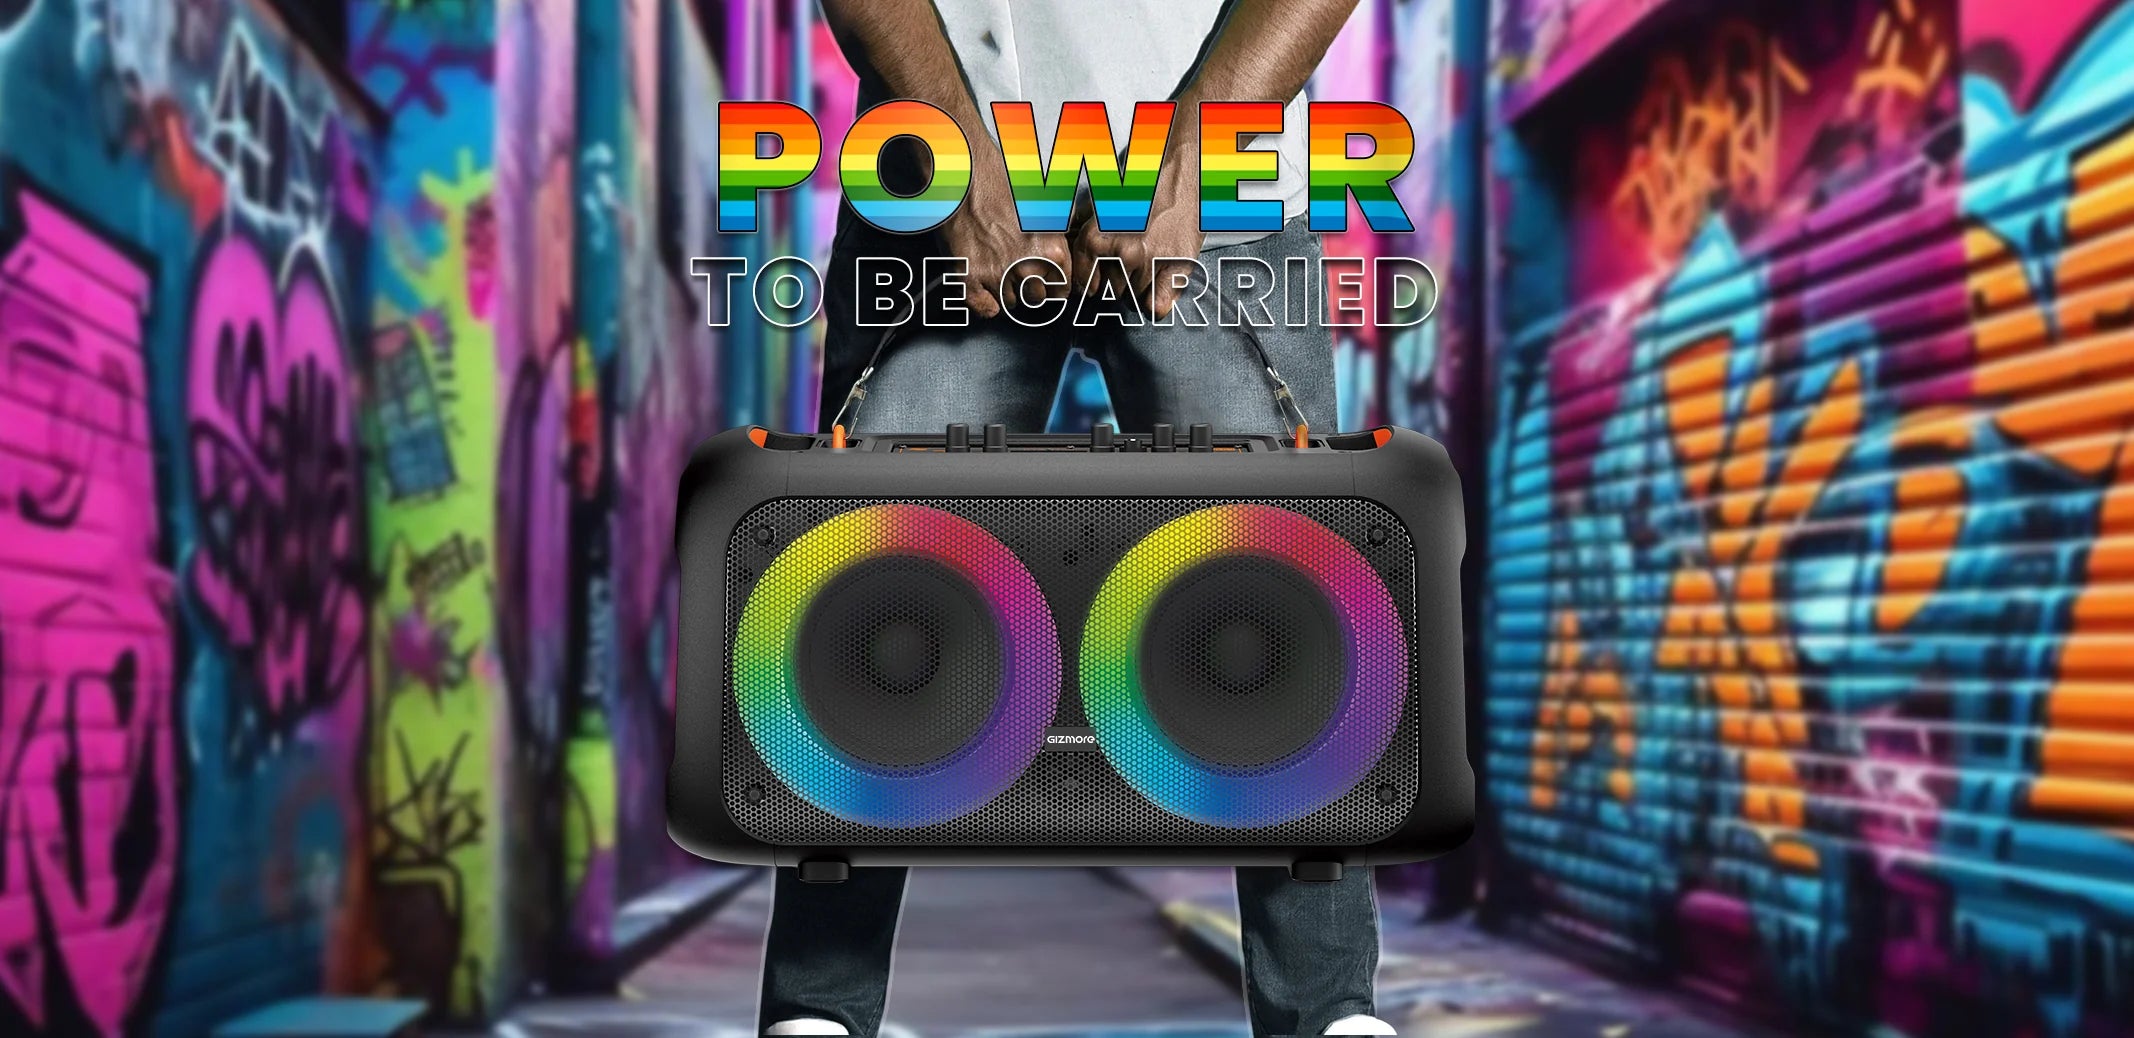 GIZMORE Trolley T3000 DRUMM 60 W Bluetooth Portable Party Speaker Up to 4 hrs Playtime with Digital LED Display, RGB Lights, Multi Connectivity USB, FM, AUX, SD Card and Wireless MIC